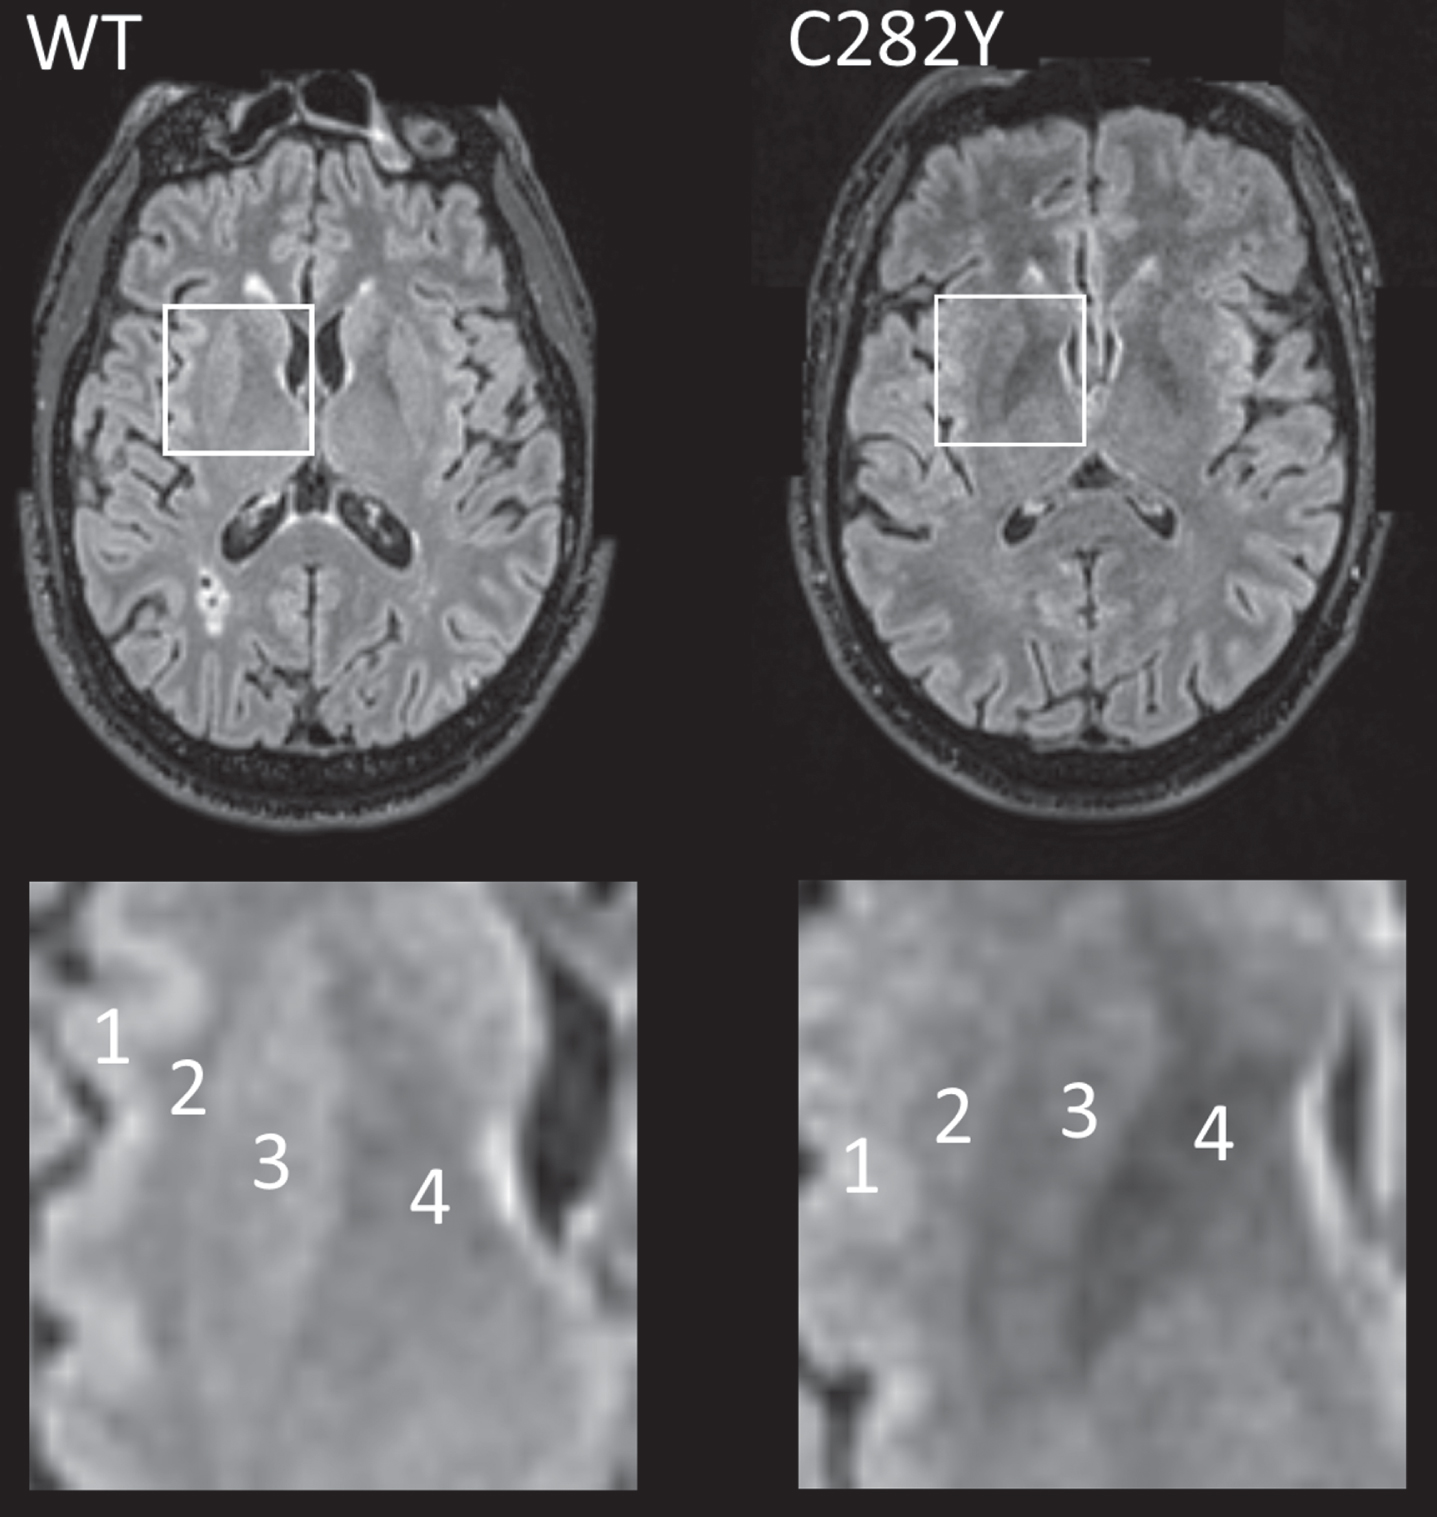 
              MRI T2 FLAIR axial images for male participants closest to respective mean putamen T2* values with p.C282Y homozygote variants (right) and neither HFE variant (left, ‘WT’). In the highlighted square, cortical (1) and white matter (2) intensity appears similar in both images, but the p.C282Y homozygote image shows relative hypo-intensity (associated with iron deposition) in the putamen (3) and globus pallidus (4). Images provided by UK Biobank copyright under license. WT, wild type or neither p.C282Y nor p.H63D mutations present. See details of image acquisition in Supplementary Material.
            